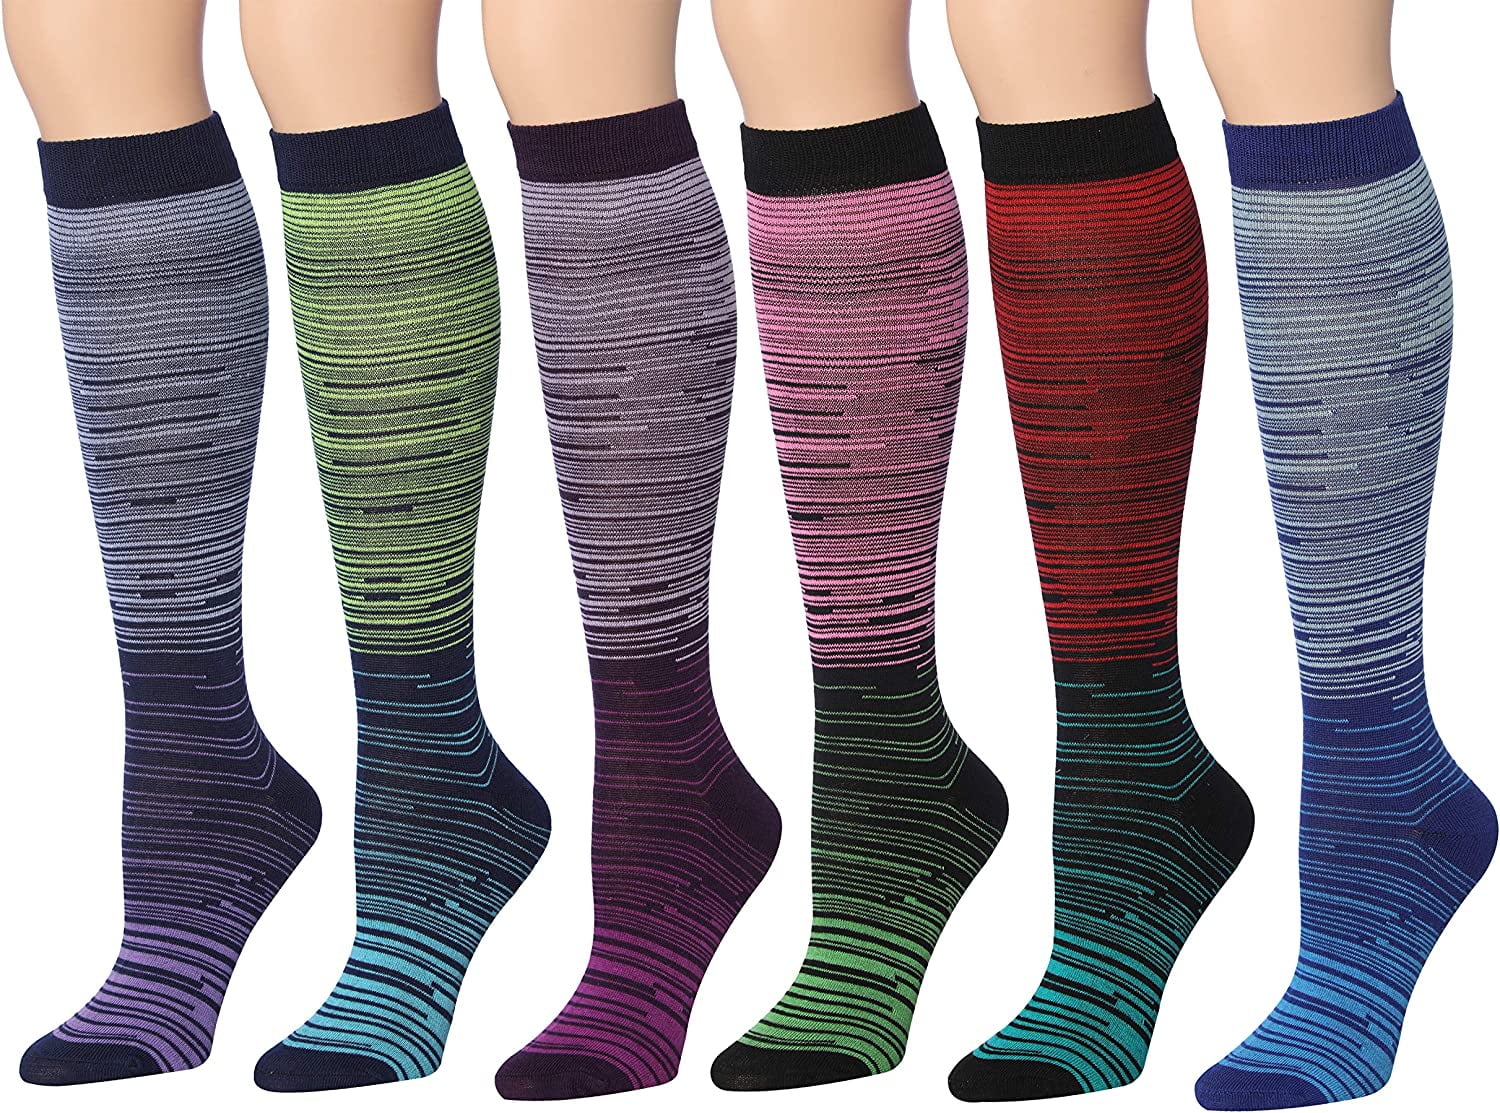 Colorfut Women's 6-Pairs Colorful Patterned Knee High Socks - Walmart.com